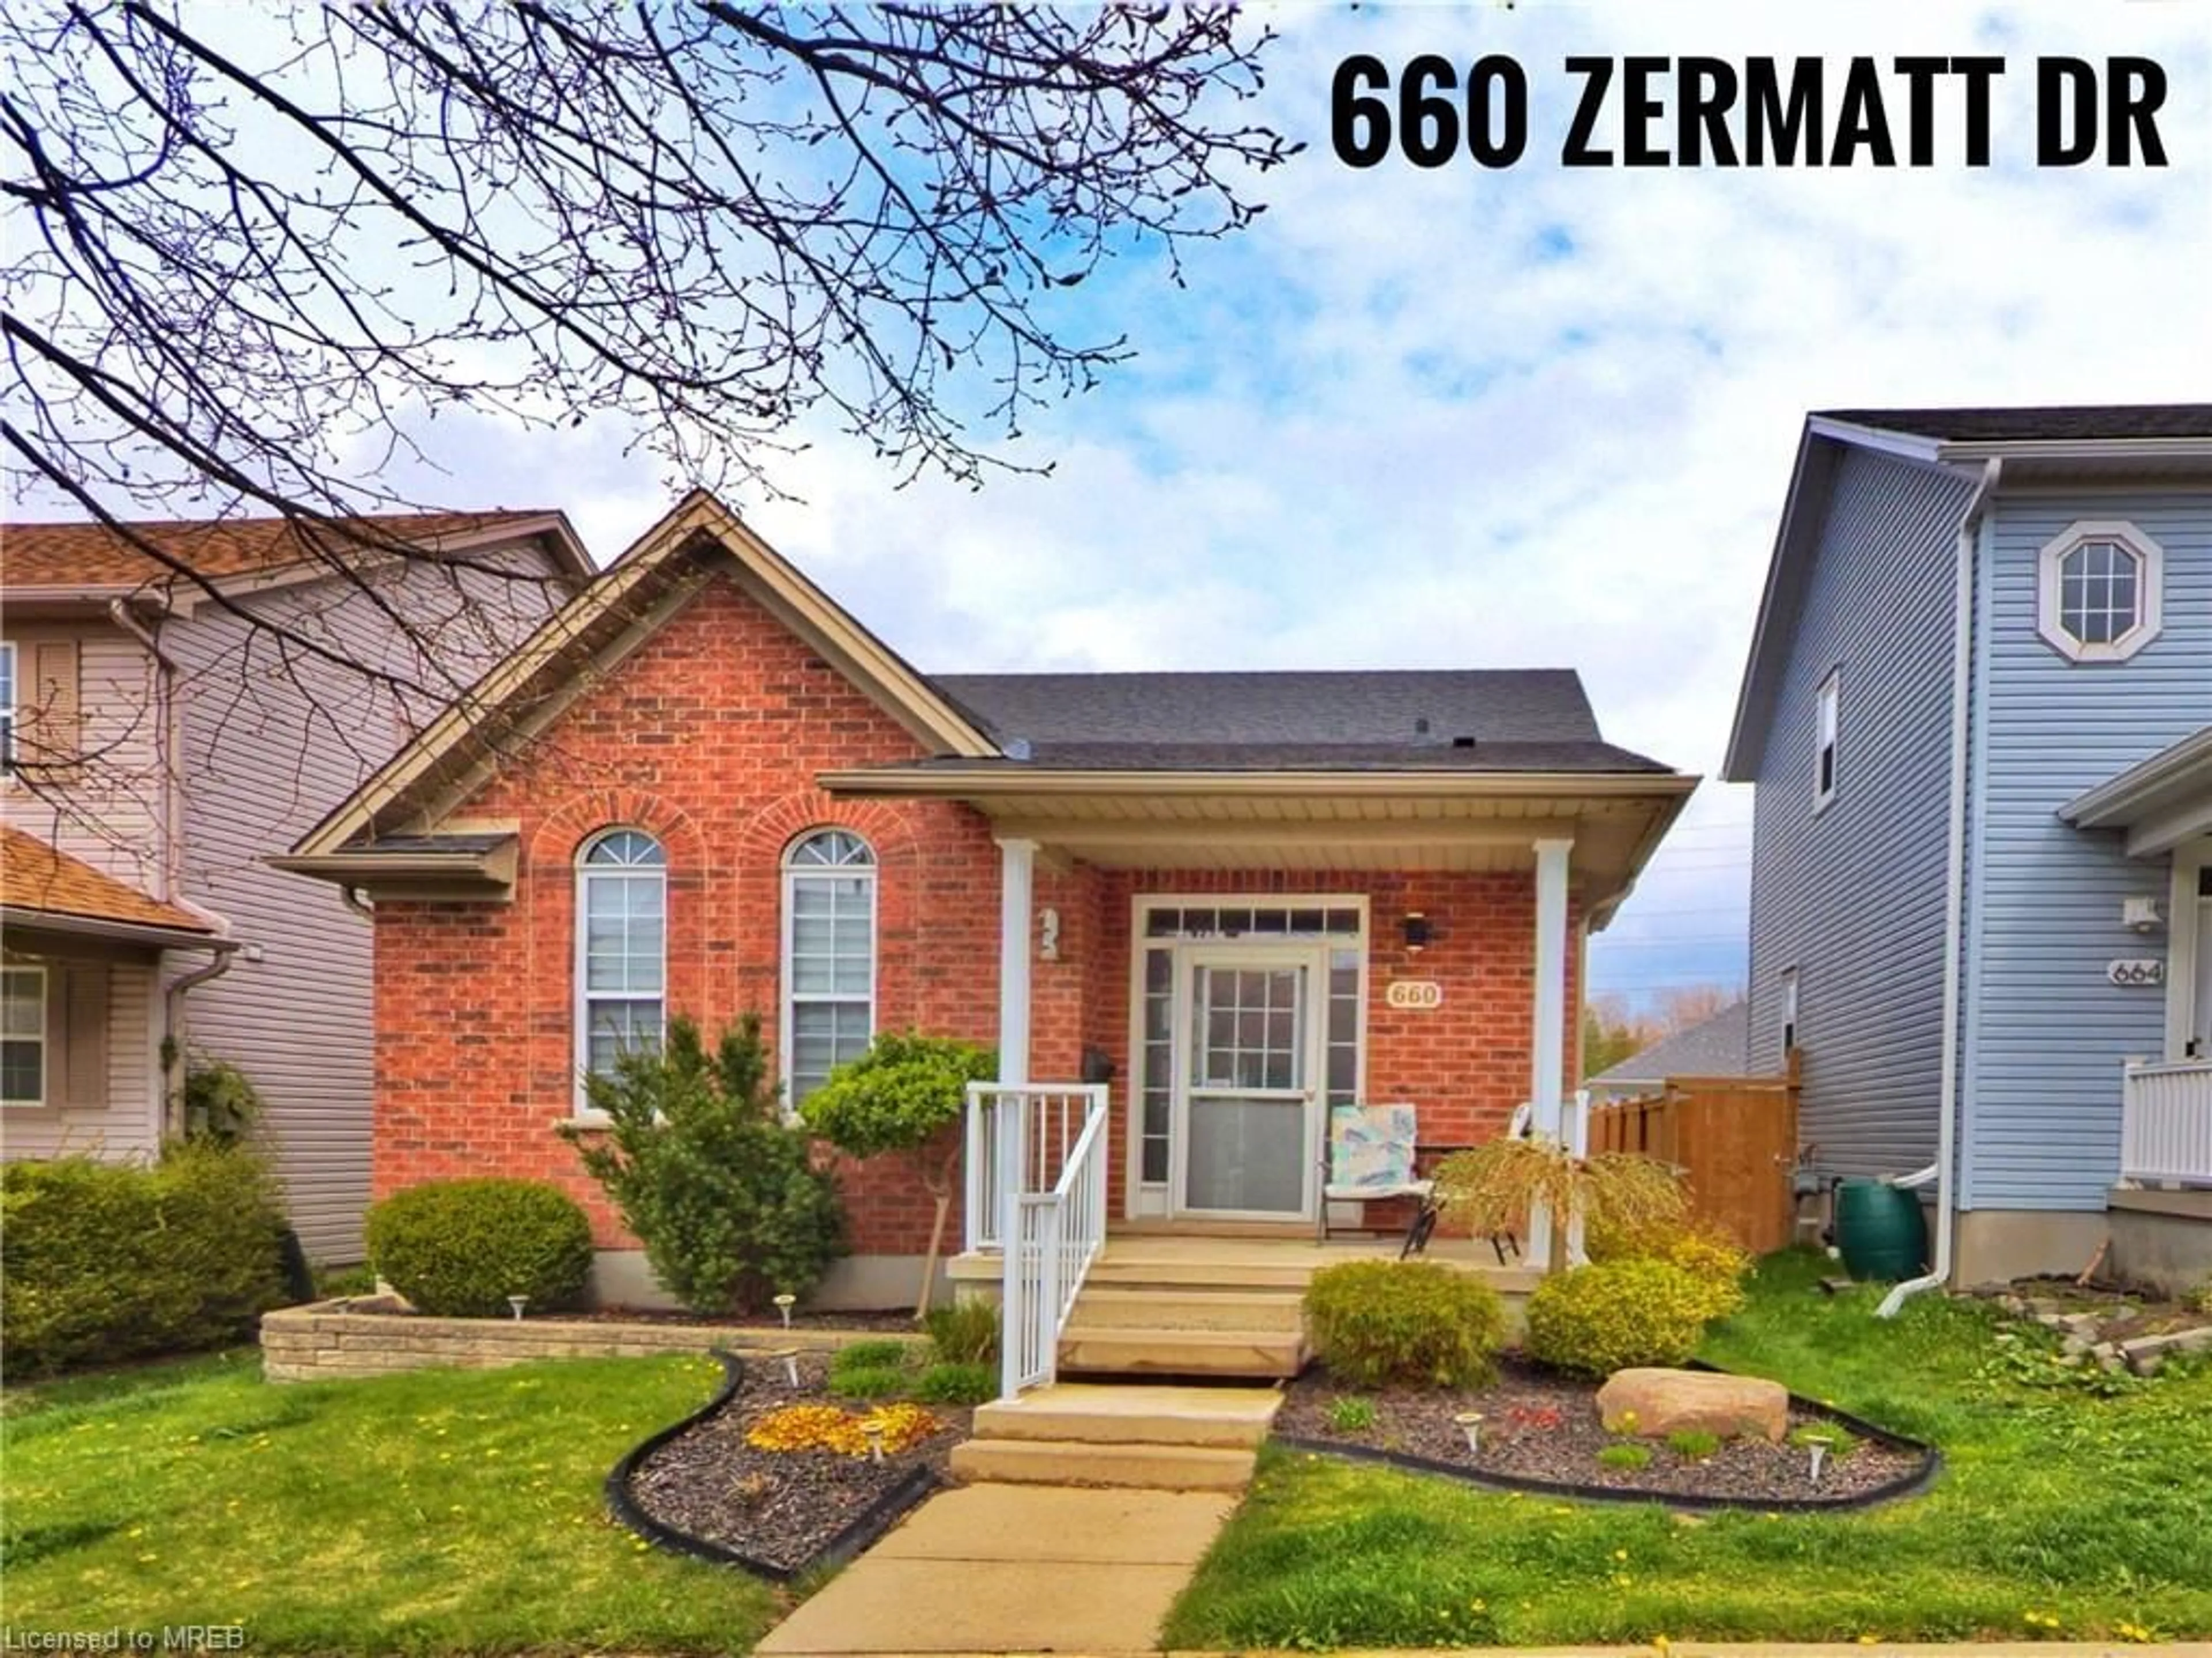 Home with brick exterior material for 660 Zermatt Dr, Waterloo Ontario N2T 2V2